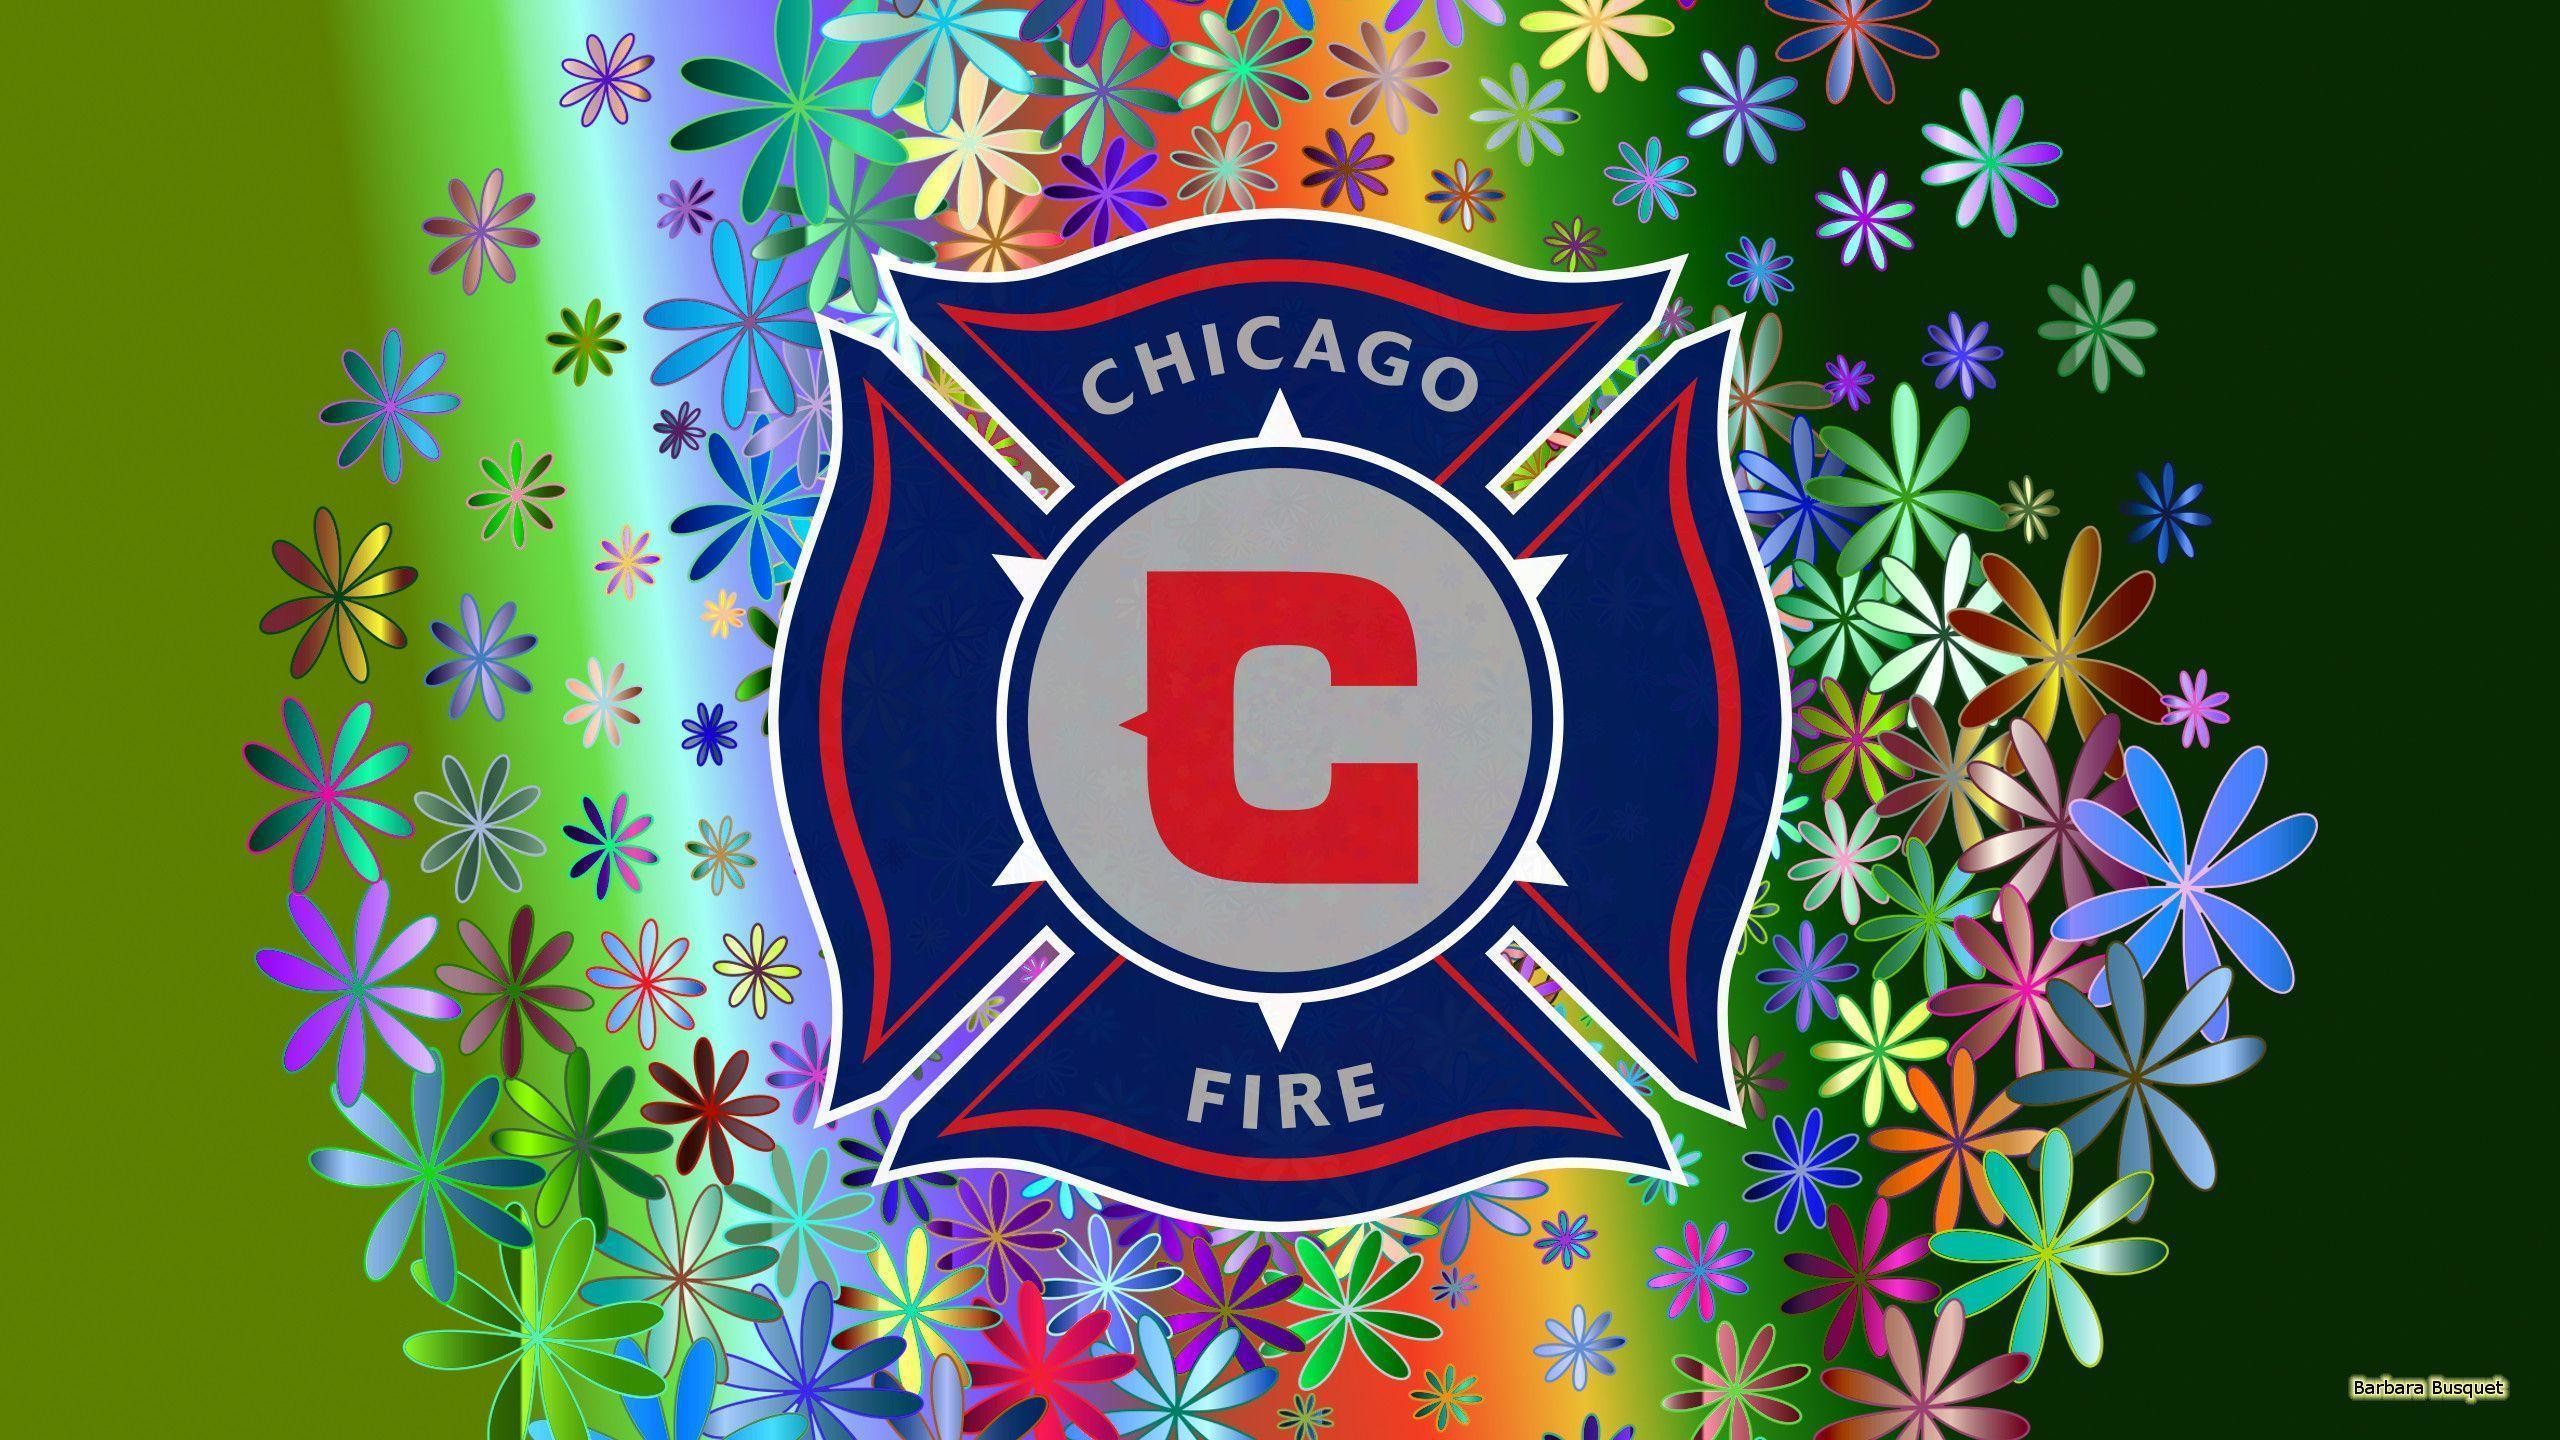 Chicago Fire Soccer Club Wallpaper Image